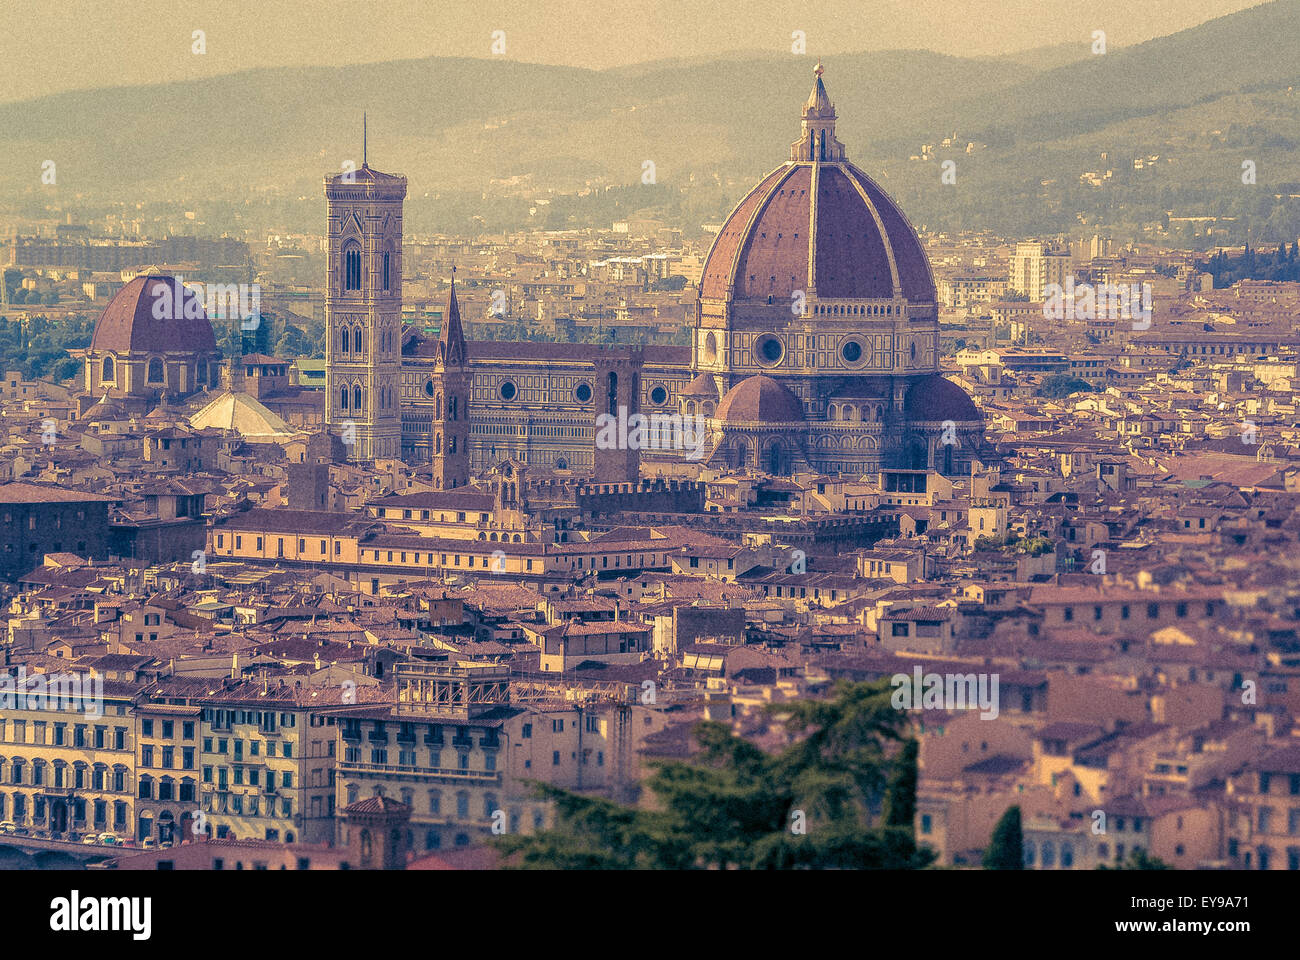 Florence Cathedral or Duomo with dome designed by Filippo Brunelleschi. Florence, Italy. Stock Photo